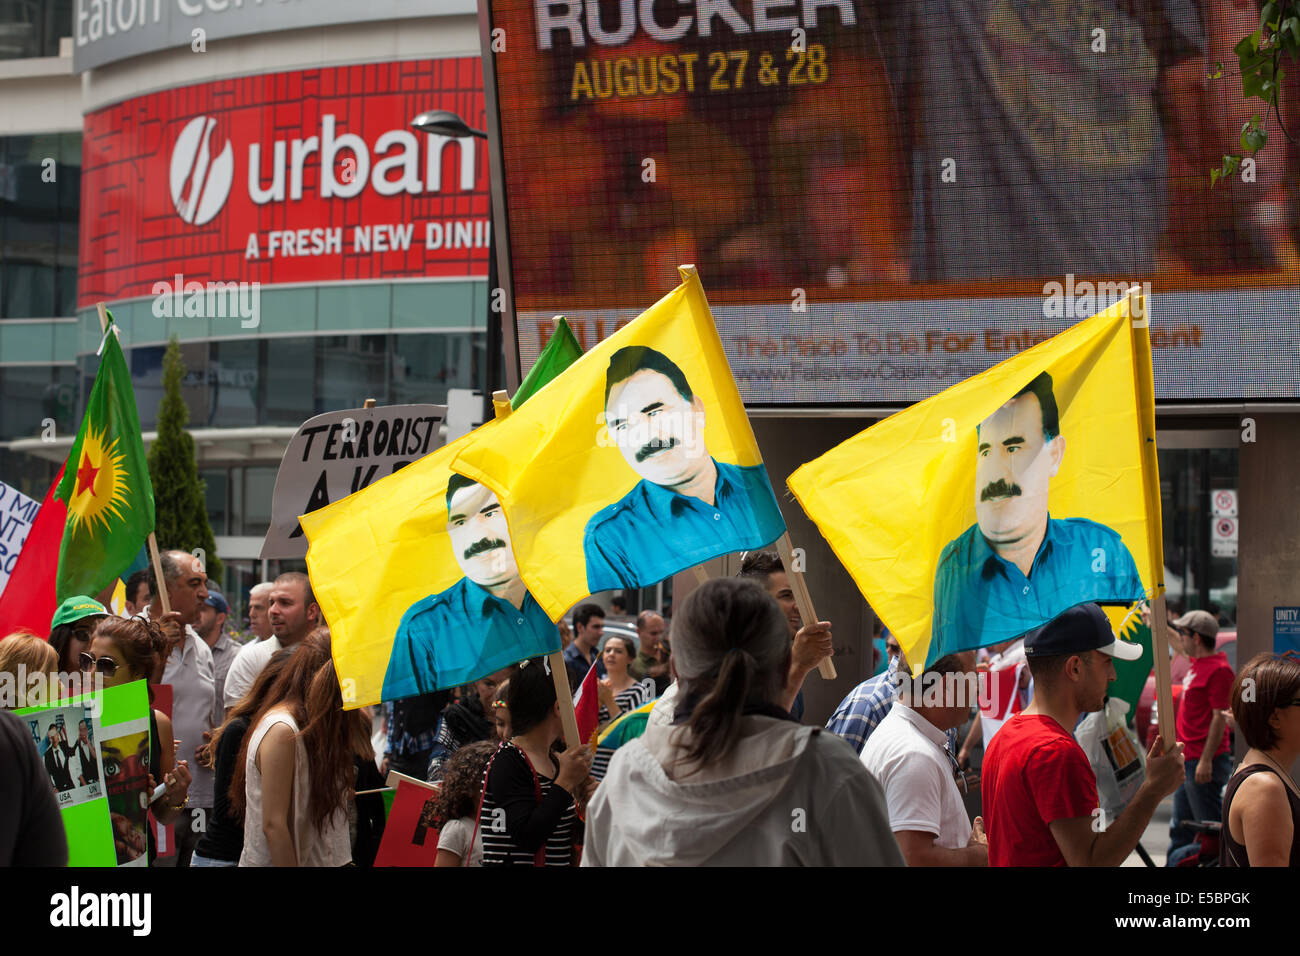 Toronto, Canada. 26th July, 2014. Kurdish Canadians protesting against ISIS and Turkey at the Yonge-Dundas Square   , July 26, 2014  in Toronto, Canada. Credit:  igor kisselev/Alamy Live News Stock Photo